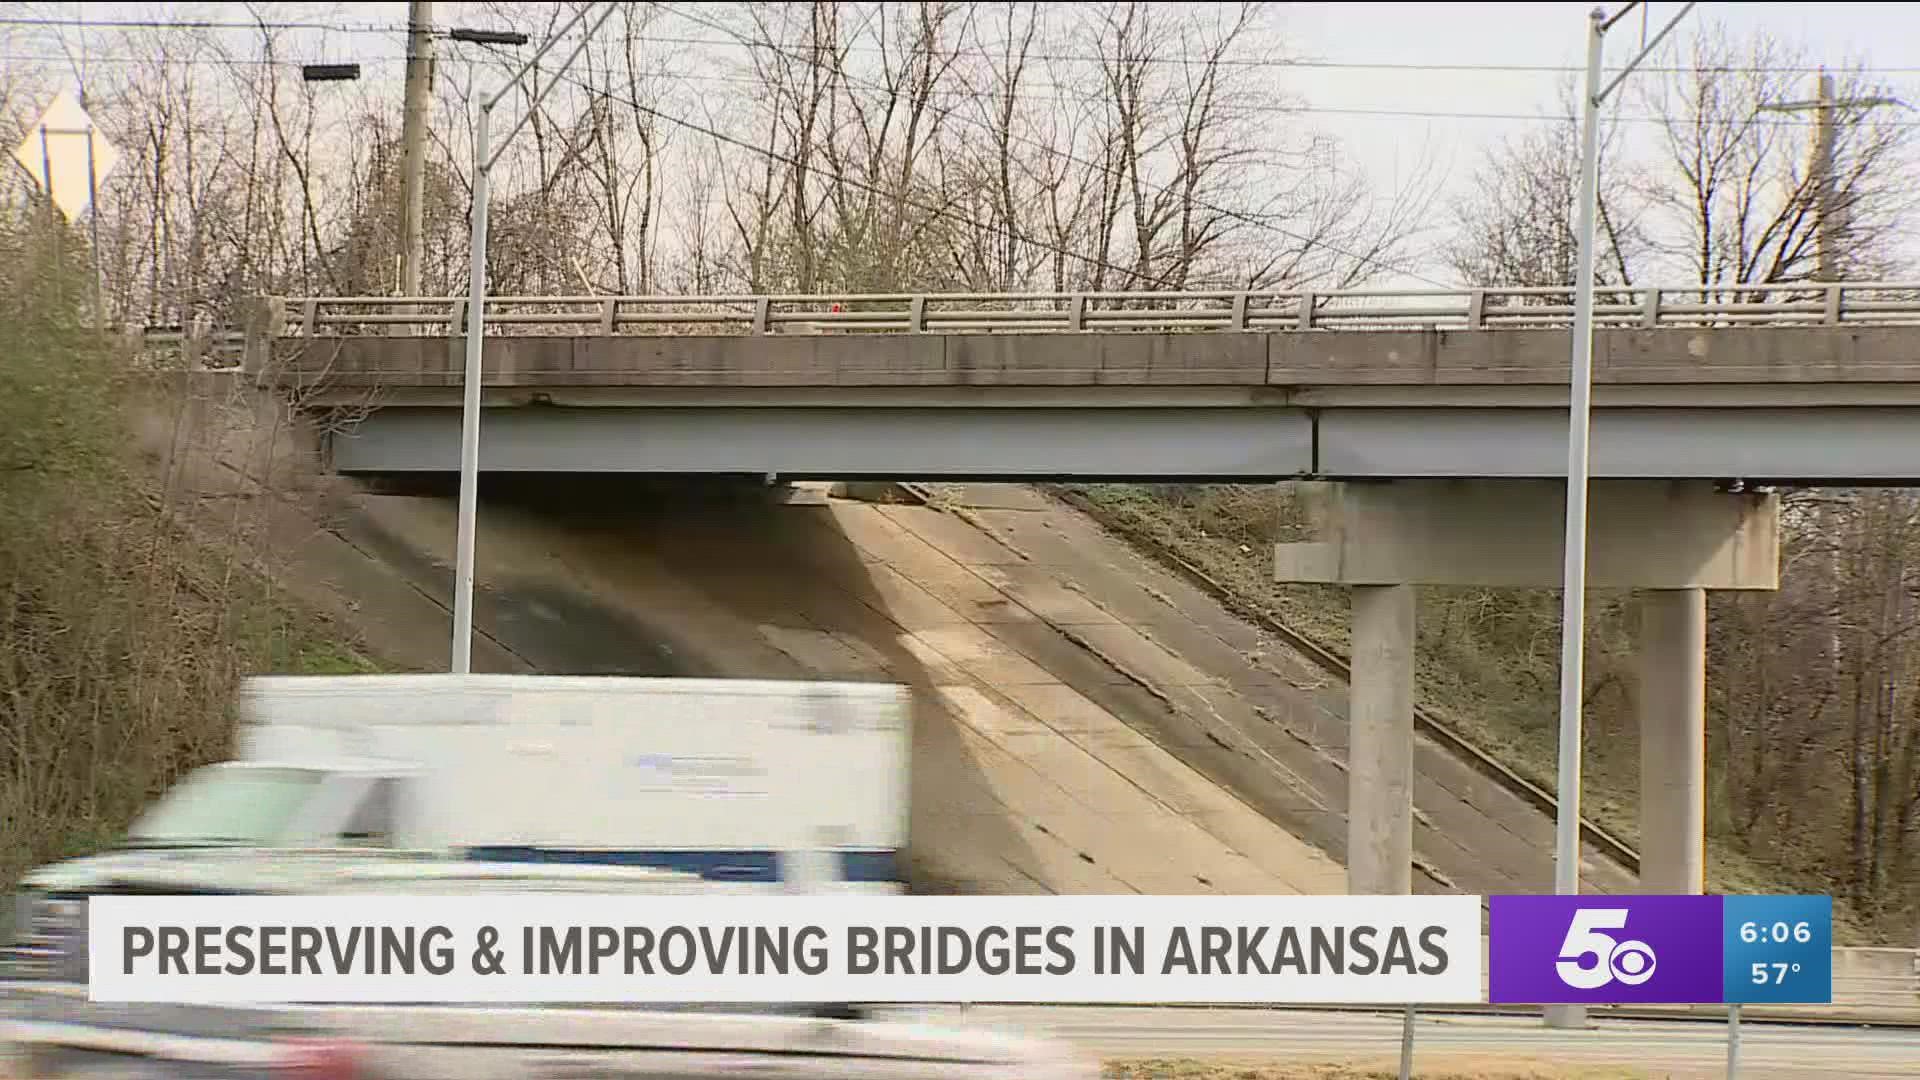 In Arkansas there are more than 12,000 bridges, 661 reportedly are in "poor" condition.